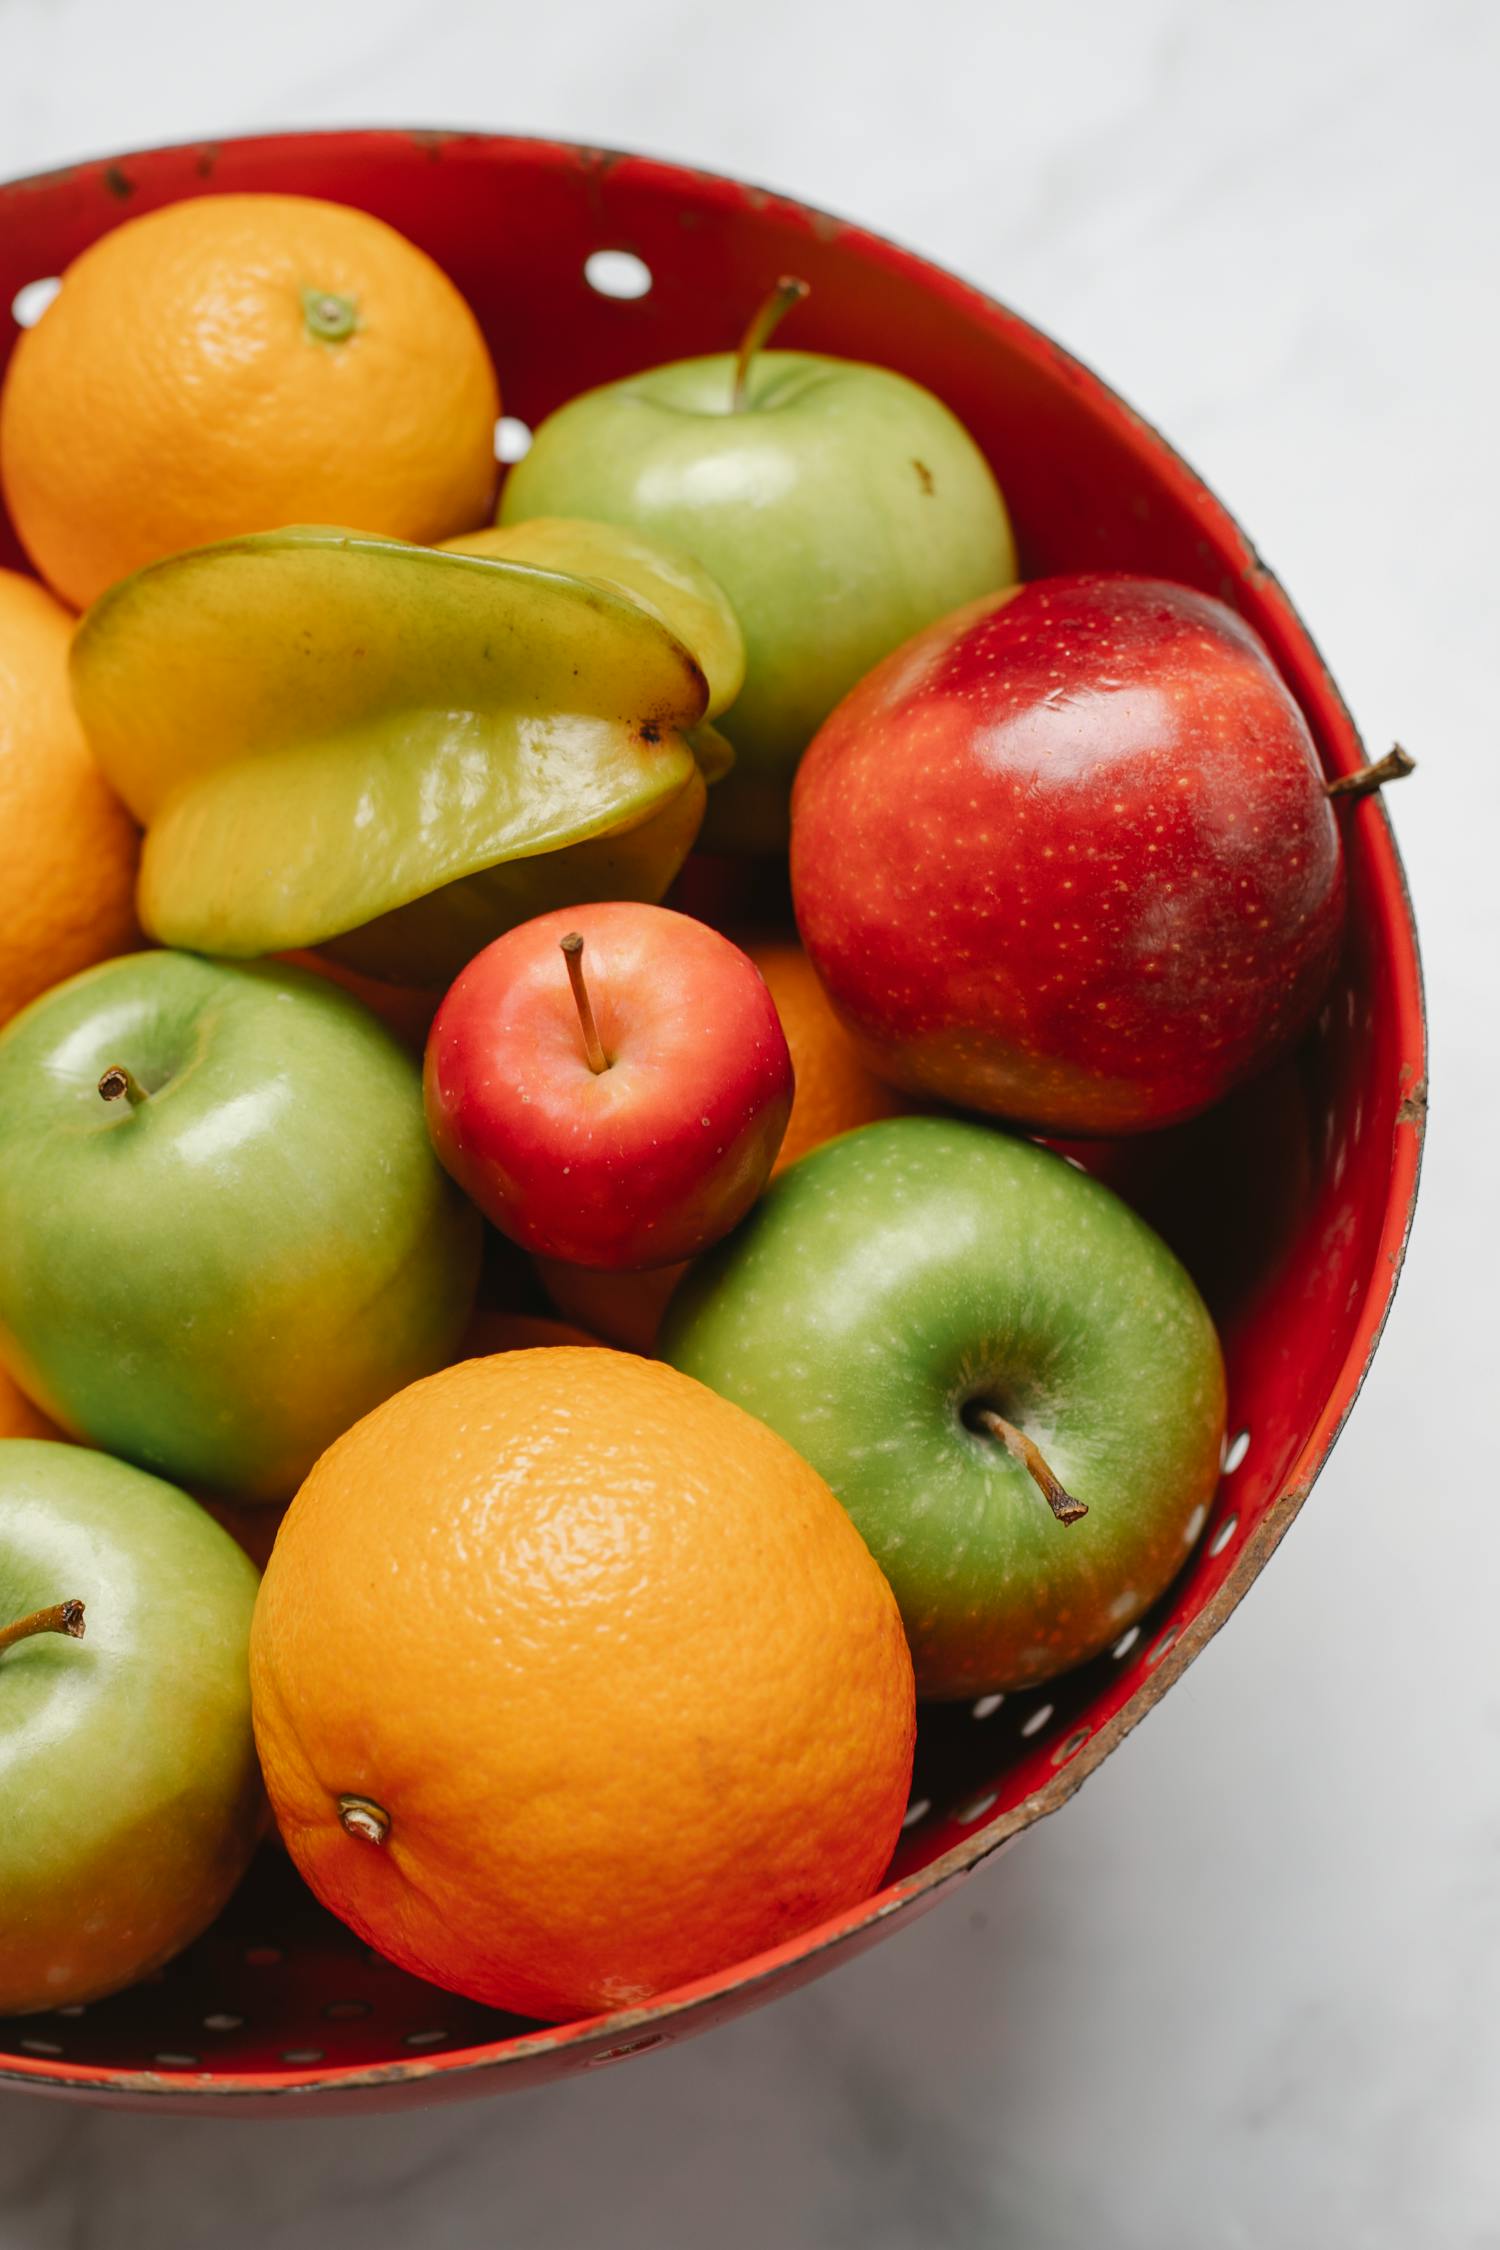 Bright Whole Fresh Fruits In Strainer On Table · Free Stock Photo